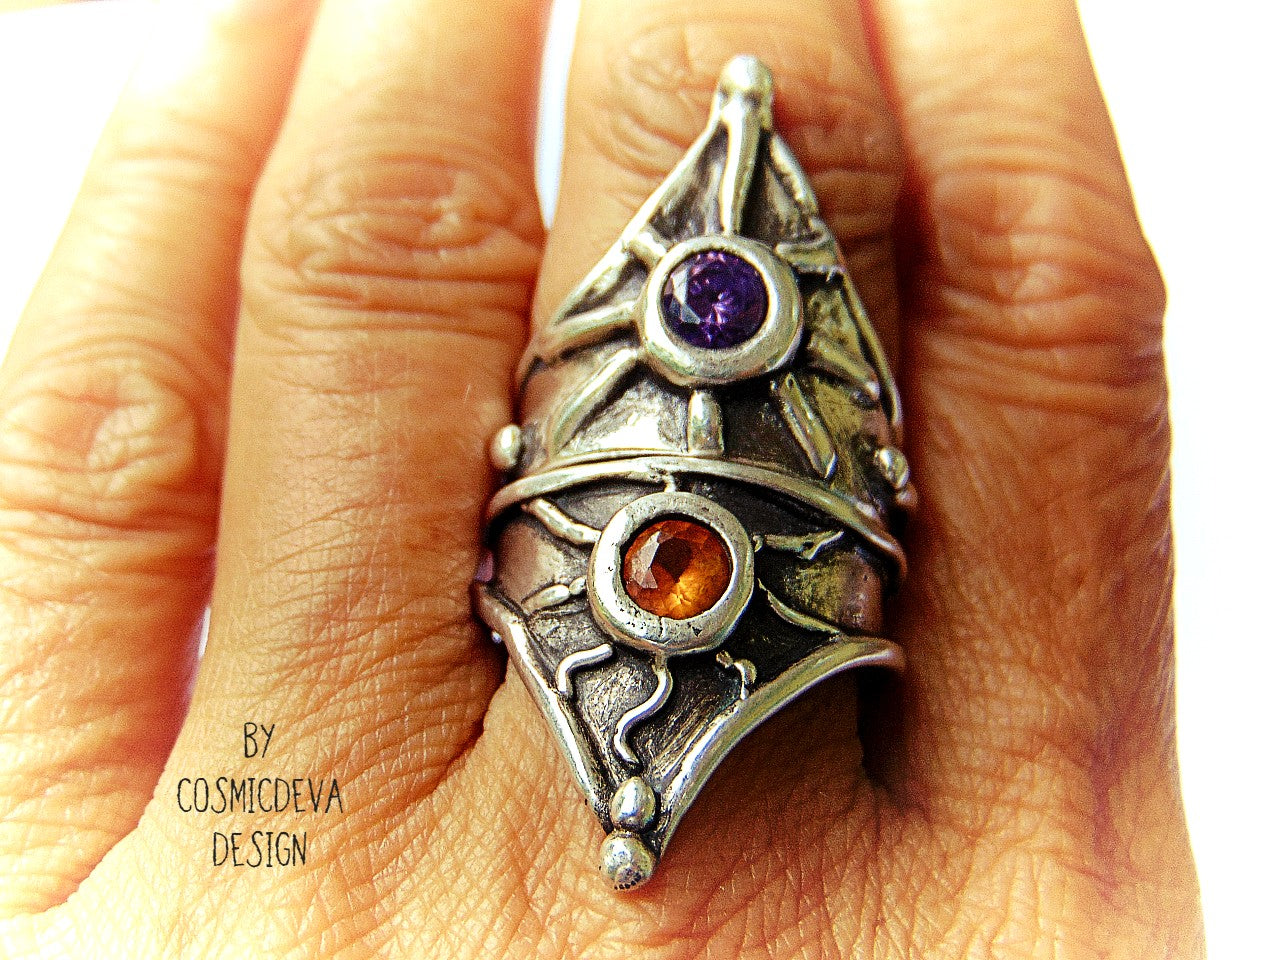 Beautiful hand sculptured medieval triangle shaped shield sterling silver ring with a 5 mm round citrine stone. This Ring is made of solid pure .950 sterling silver and hallmarked as it. The ring was oxidized to give it a vintage antique design.